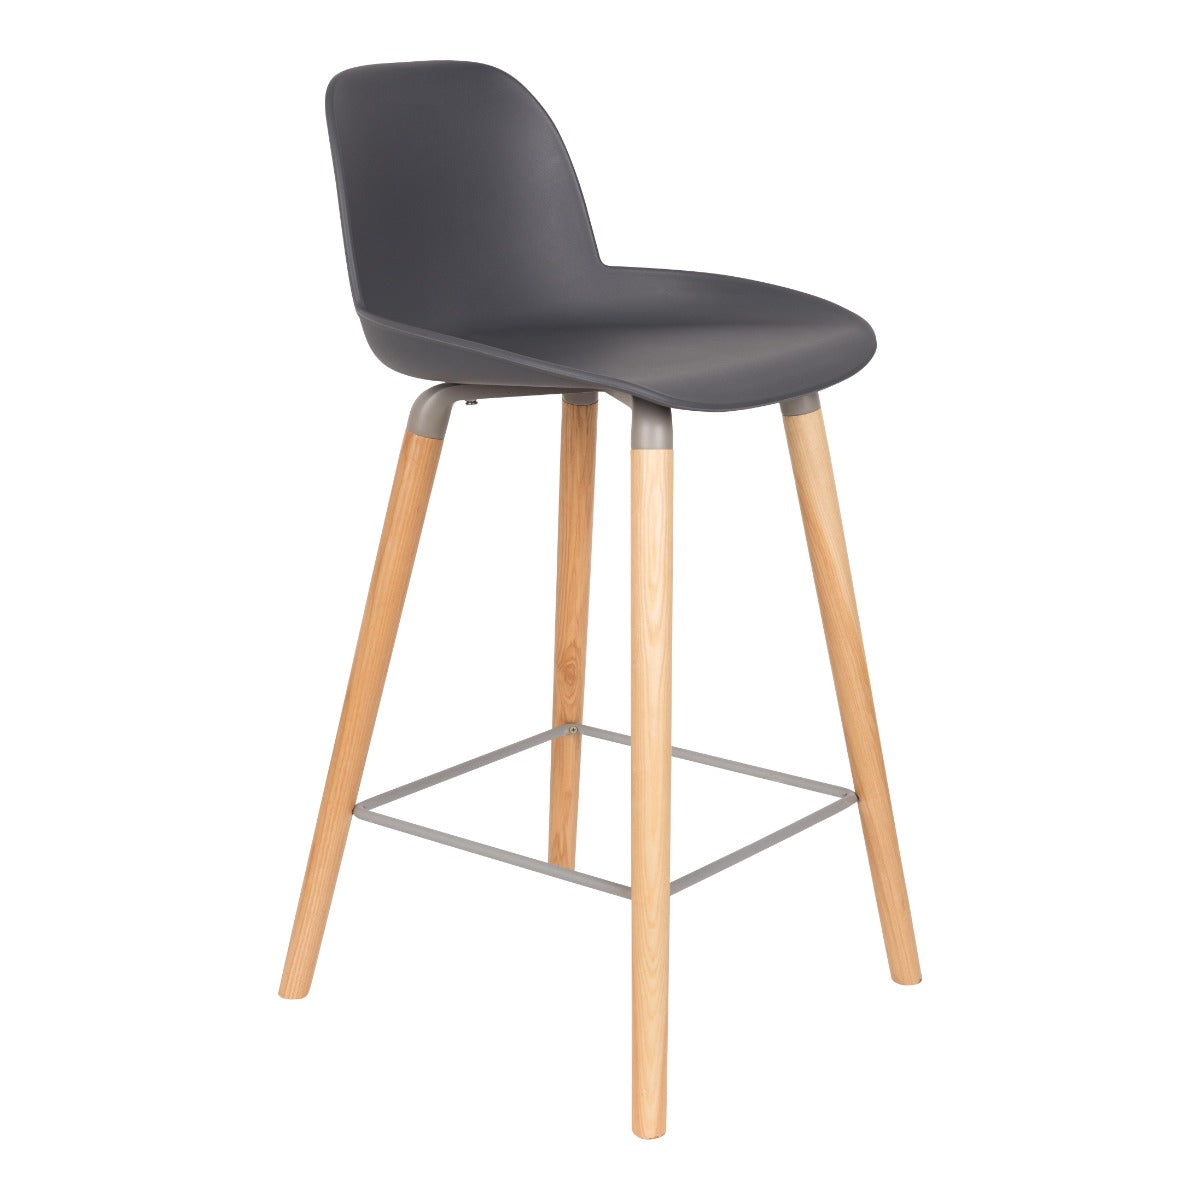 The Albert Kuip bar stool, designed by the Amsterdam Studio Ape, is an amazing combination of modern and retro style. The streamlined seat is supported by wooden, minimalist ash wood legs. It is an ideal addition to a modern kitchen island or a climate, hotel bar. It is also worth paying attention to a specially prepared leg place that improves sitting comfort.